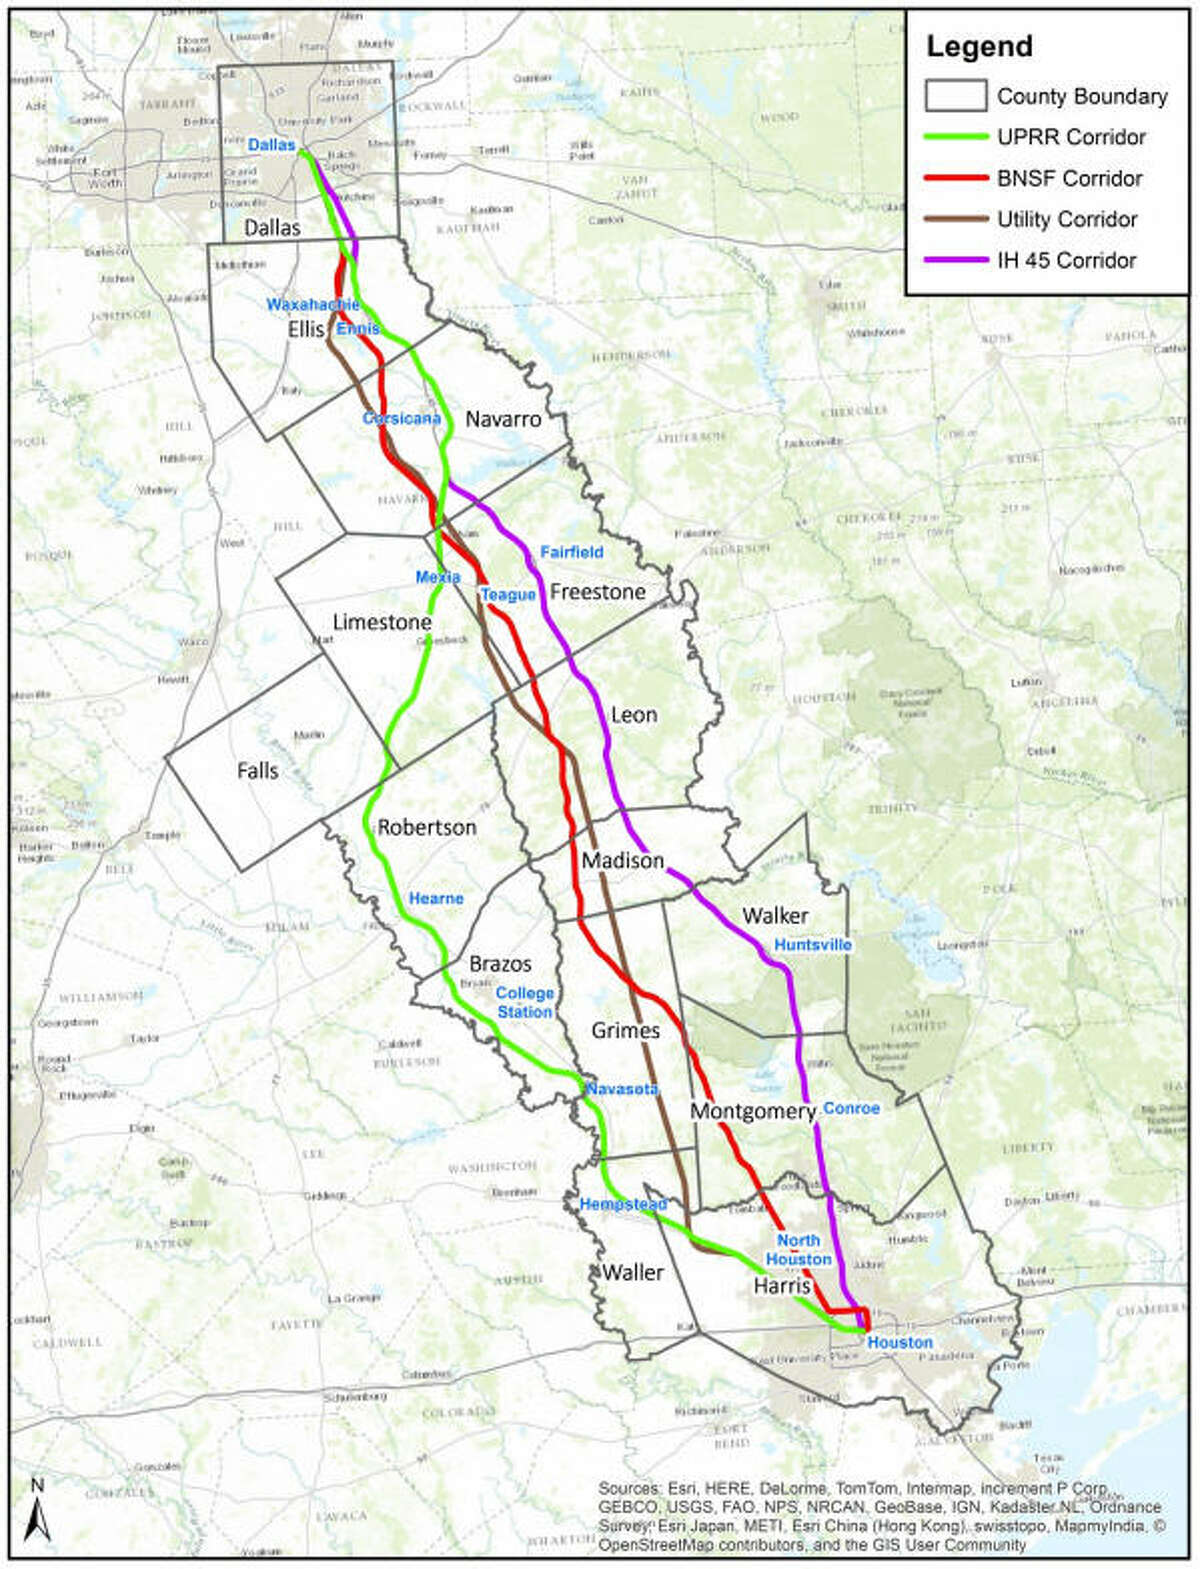 PHOTOS: Routes for a potential Houston-Dallas bullet train A federal authority gave approval to developers' preferred corridor for Texas' planned high-speed rail--the "utility corridor," a 240-mile long swath, 70 percent of which follows high-voltage power lines, providing easier access to power and easing problems with right-of-way acquisitions. The corridor is wide; now the company must design a precise route. Take a detailed look at some of the locations the proposed Houston-Dallas bullet train may pass through ...